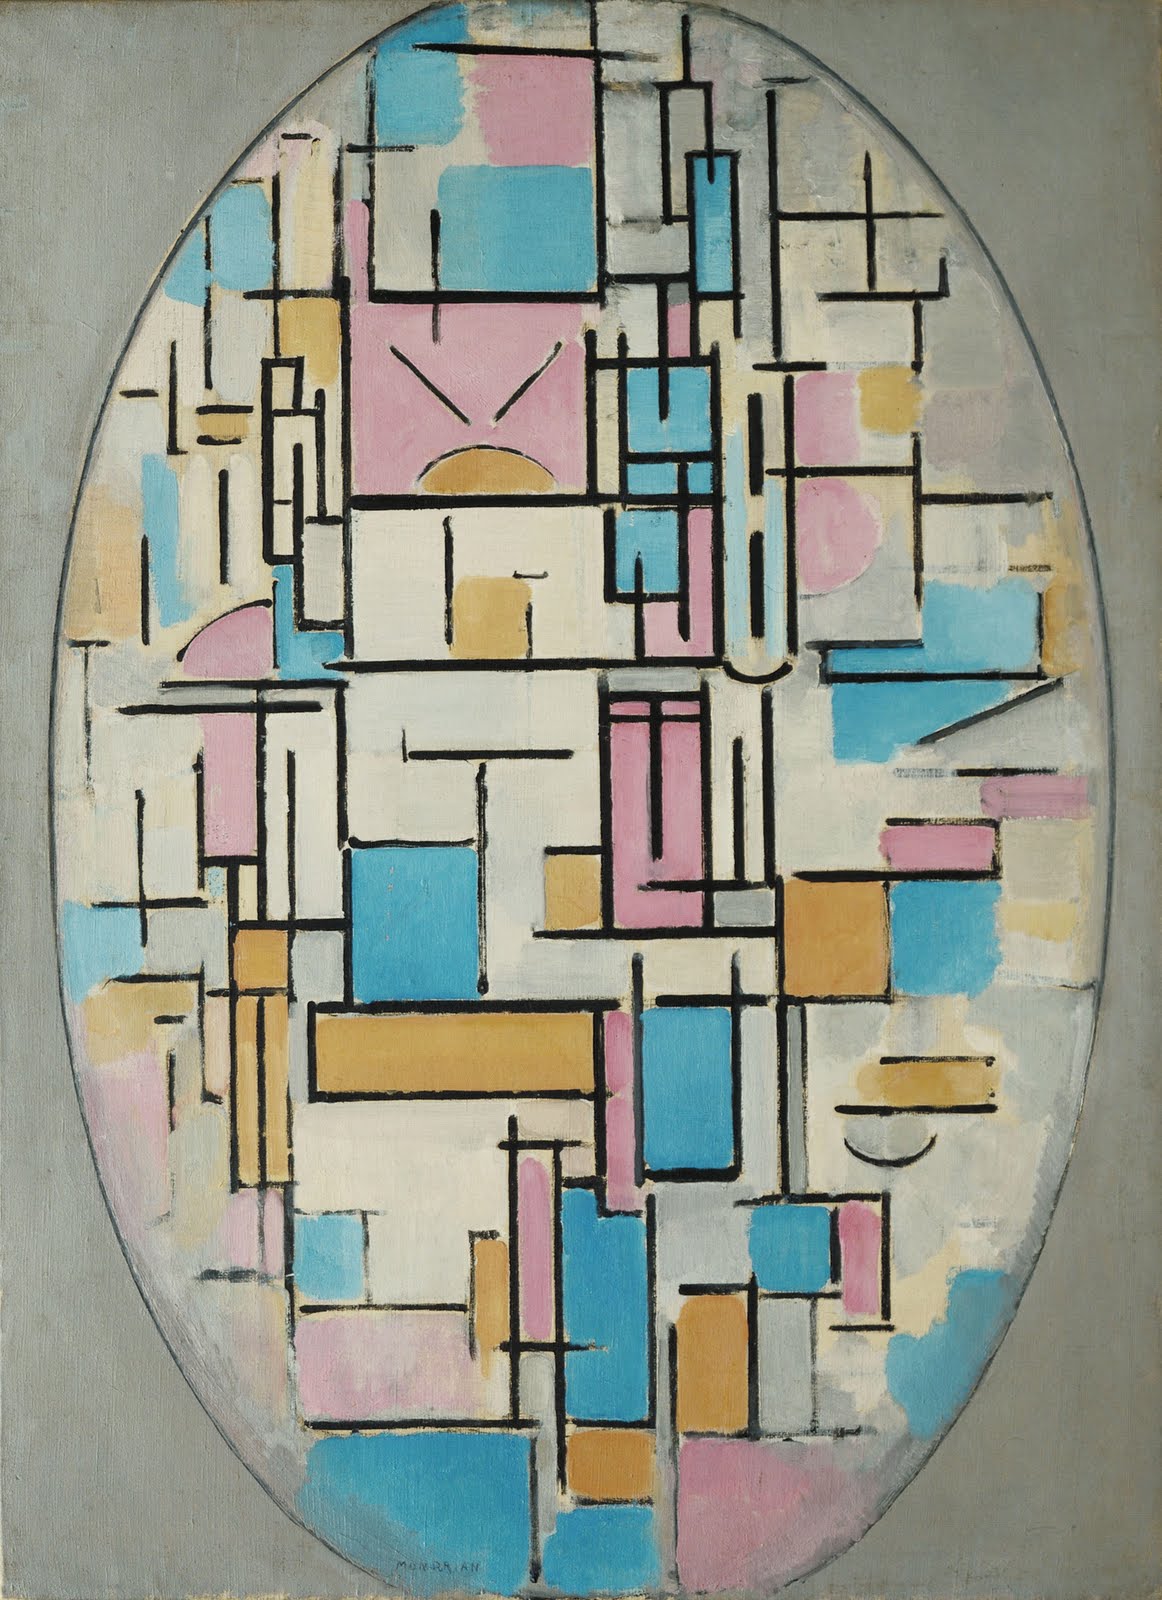 Piet-Mondrian-Composition-in-Oval-with-Color-Planes-1.jpg